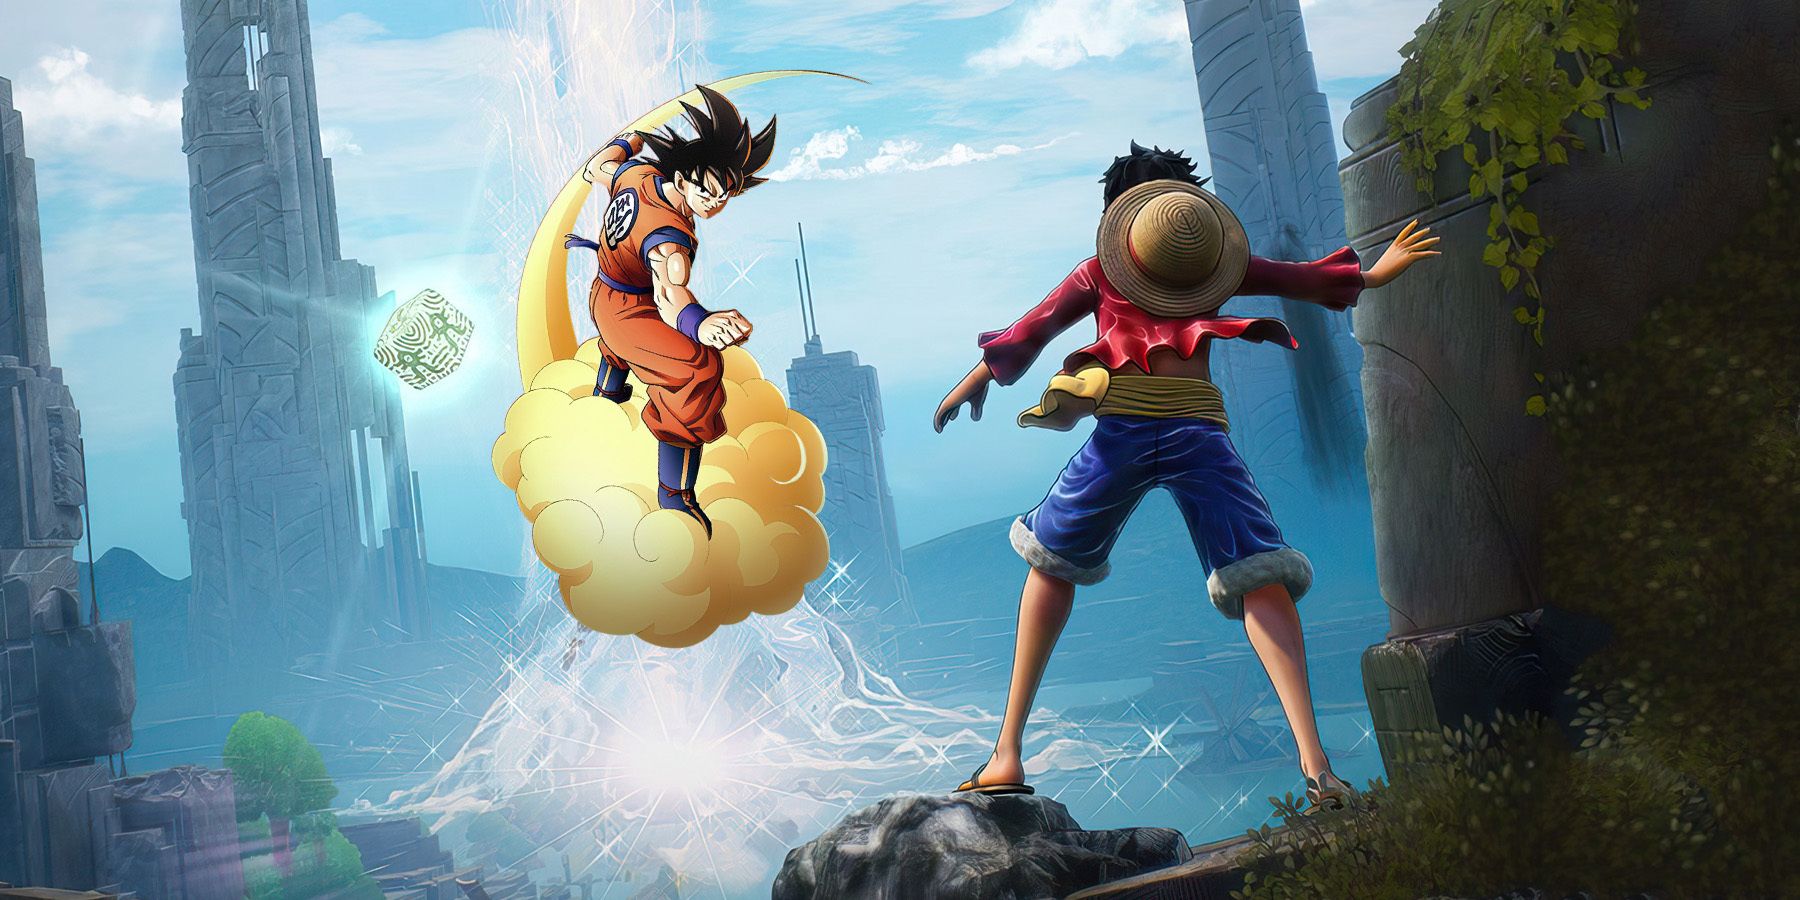 One Piece pays homage to Dragon Ball in the cutest way possible